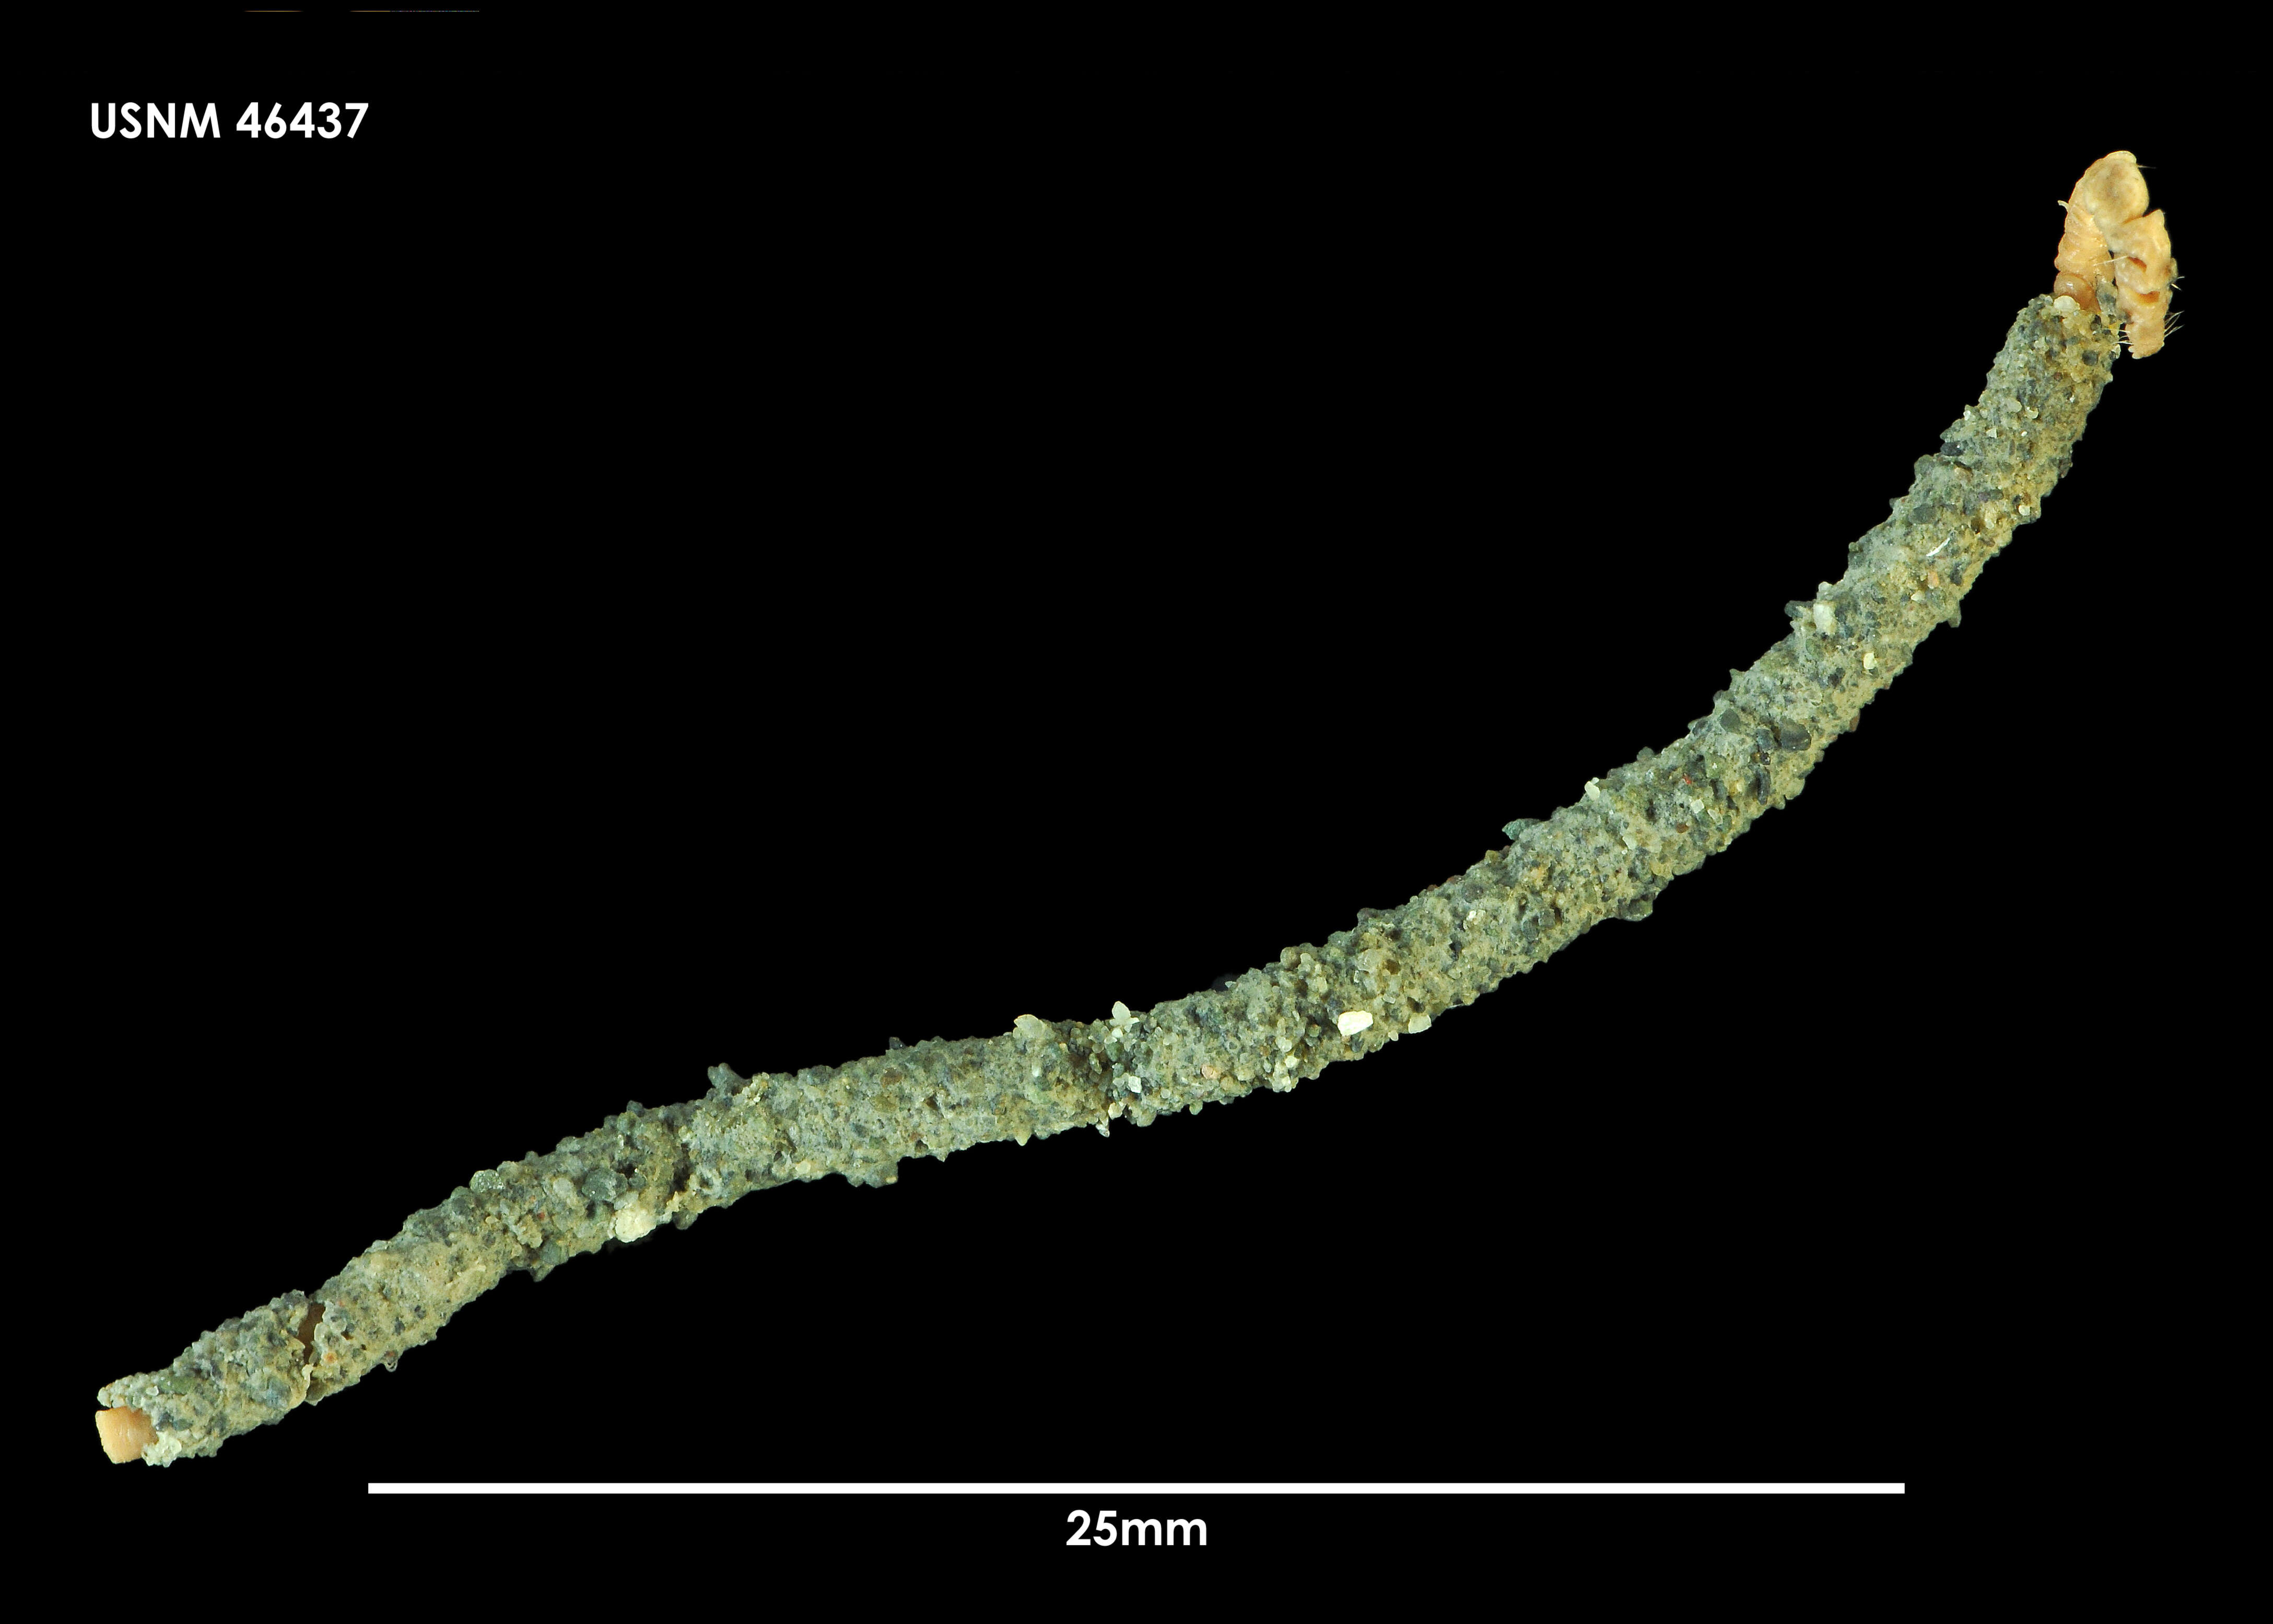 Image of bamboo worms